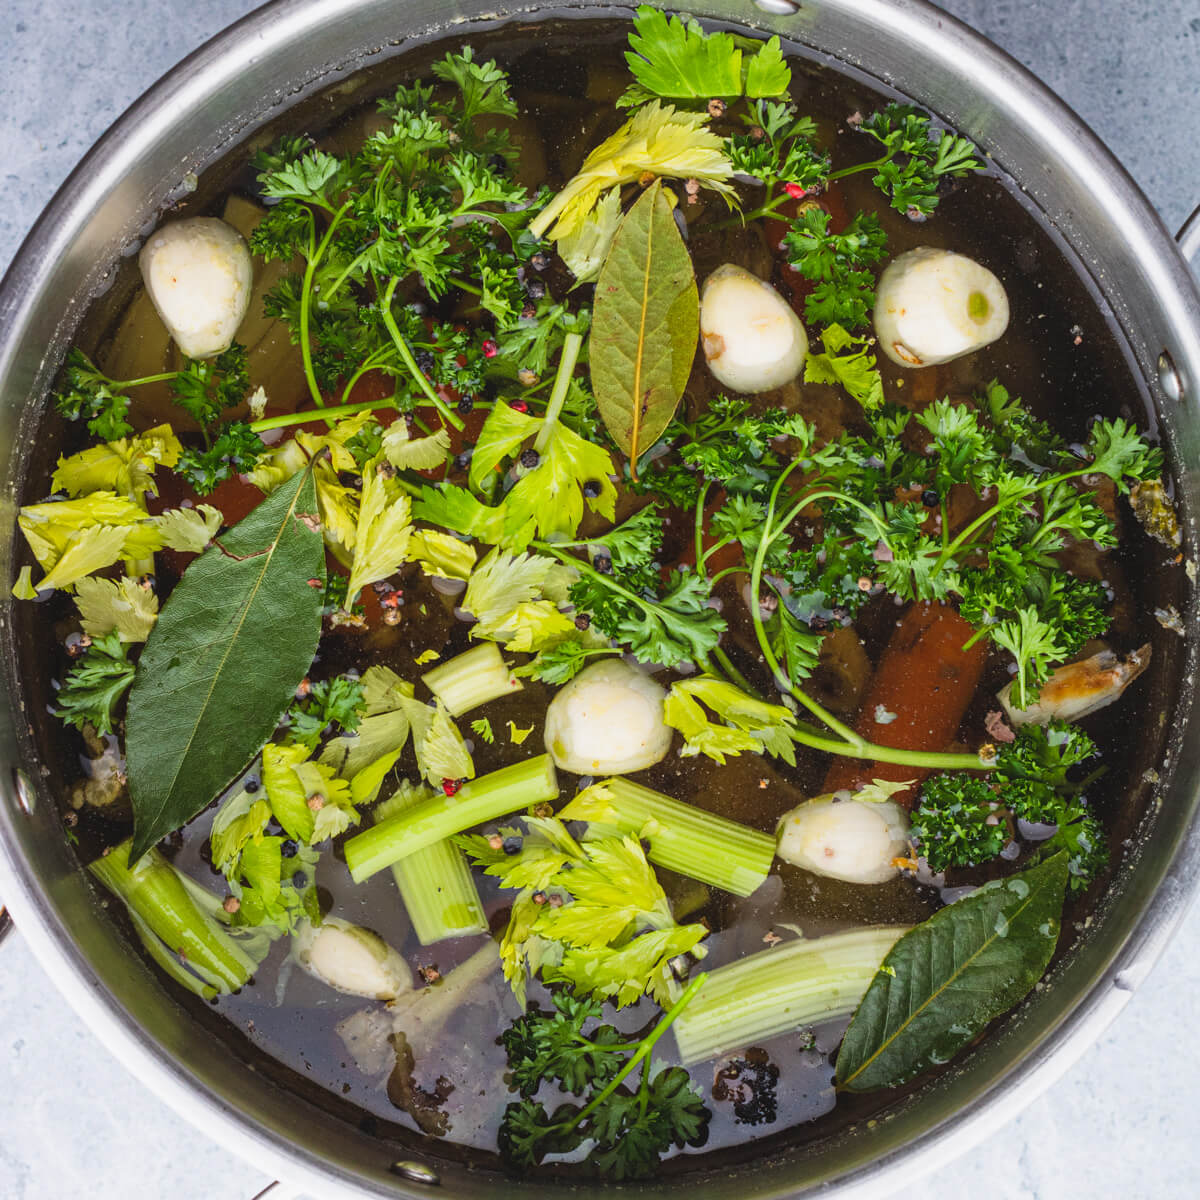 A stock pot filled with beef bones, vegetables and aromatics.